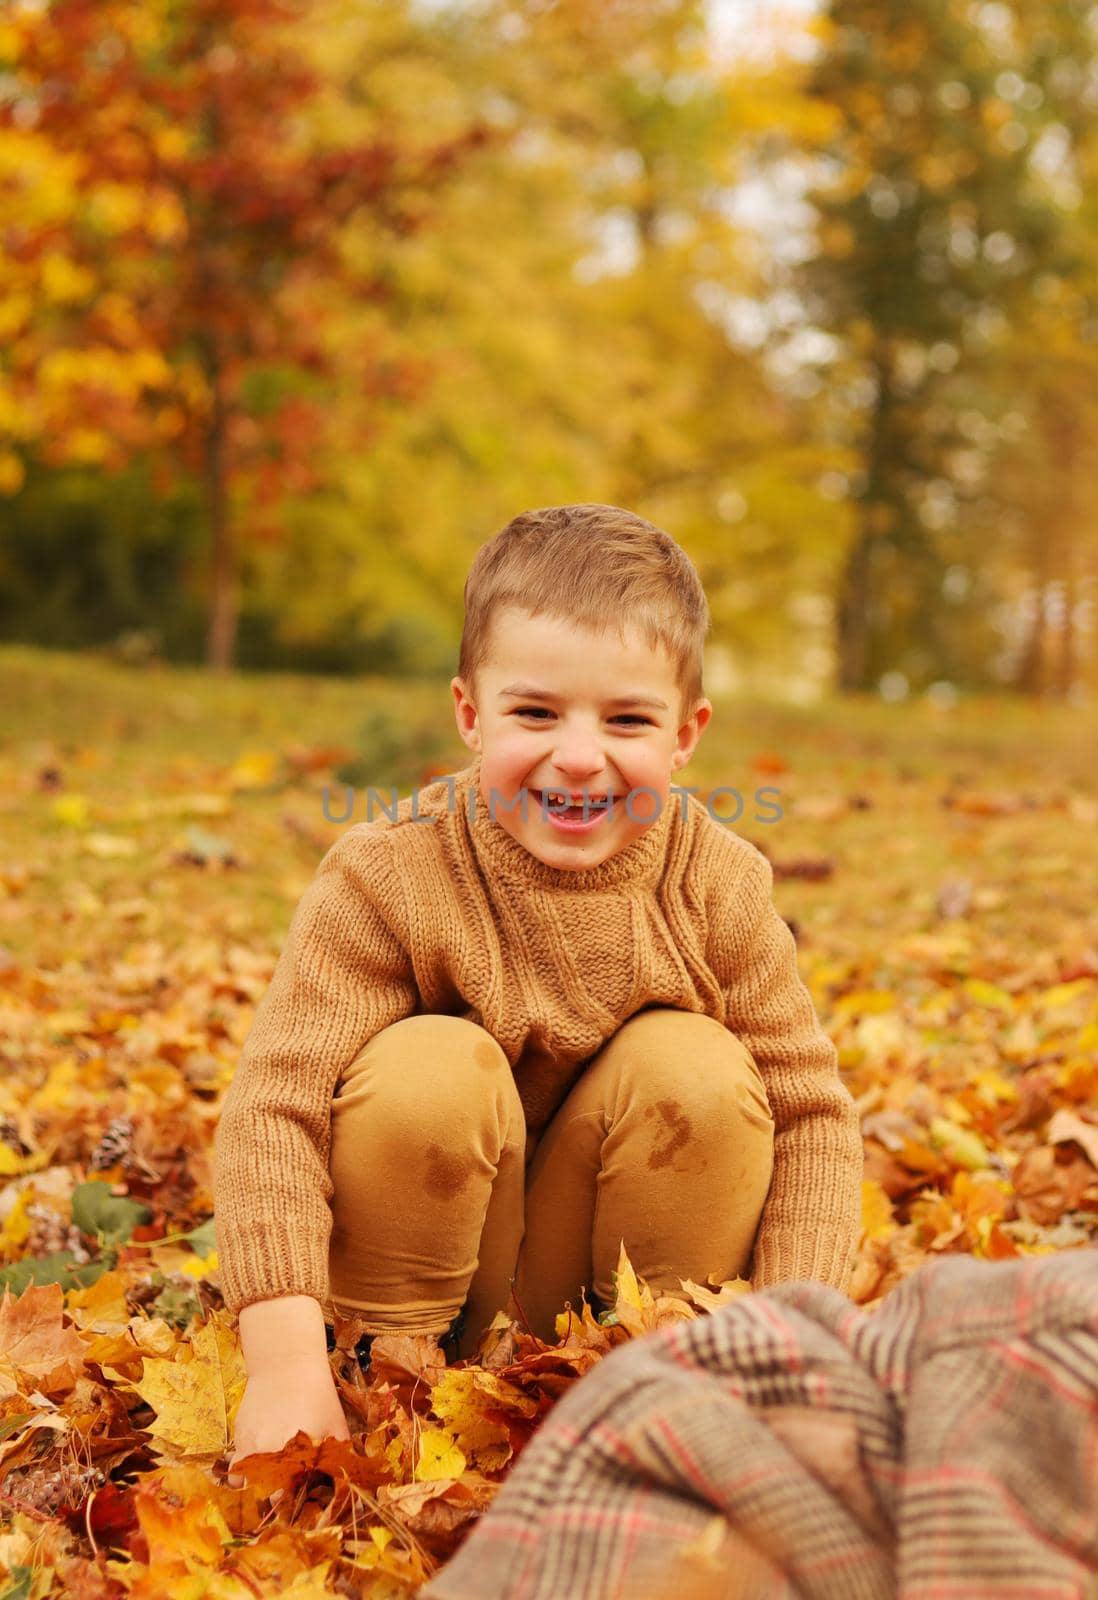 Outdoor fun in autumn. Child playing with autumn fallen leaves in park. Happy little boy